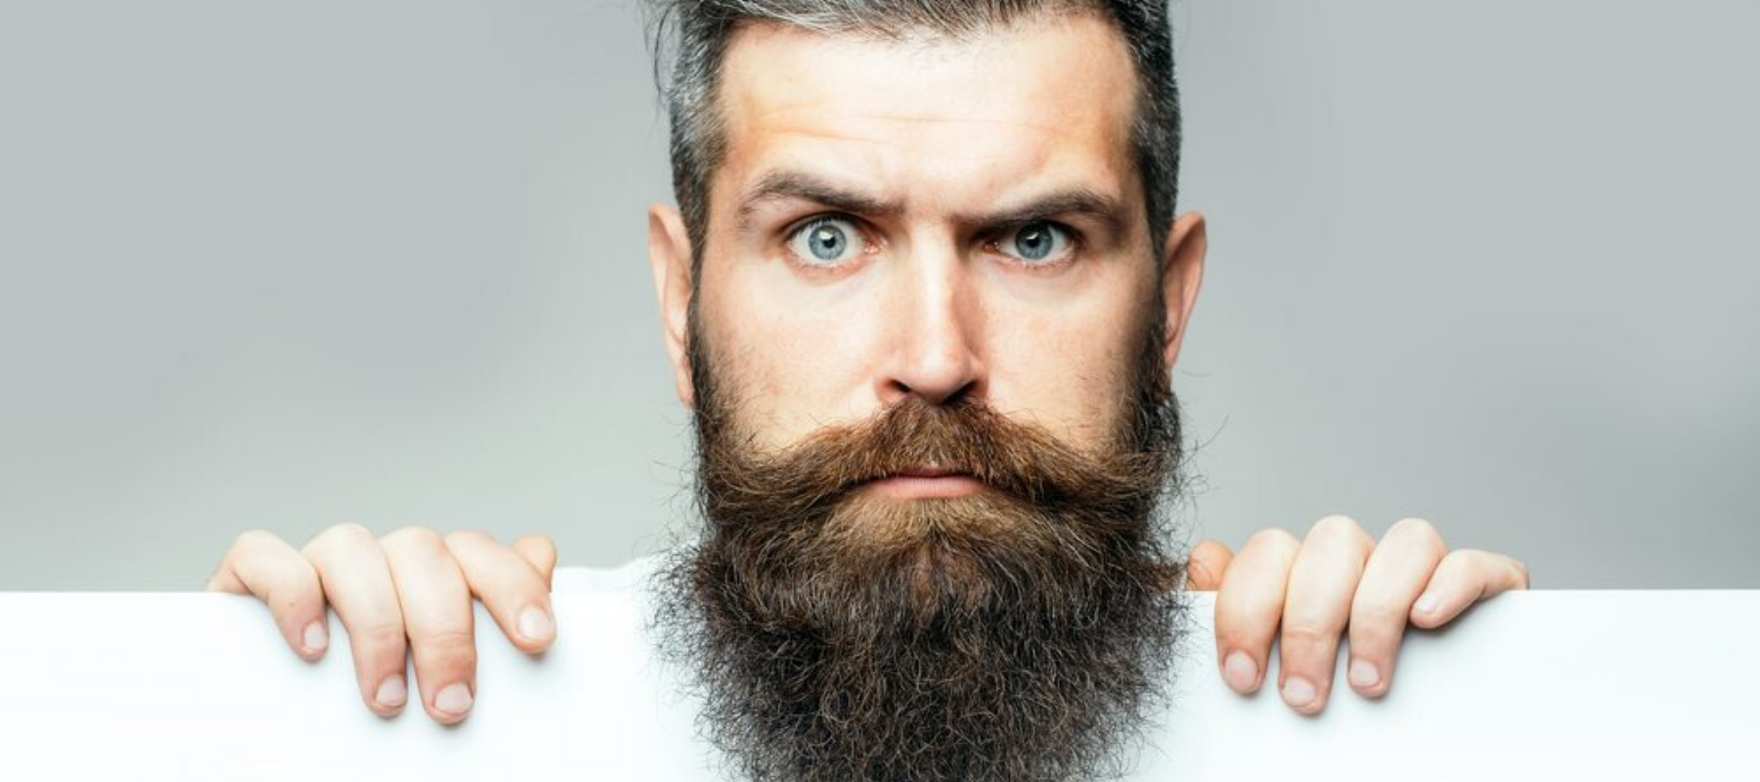 15 Things Bearded Men Hear All The Time